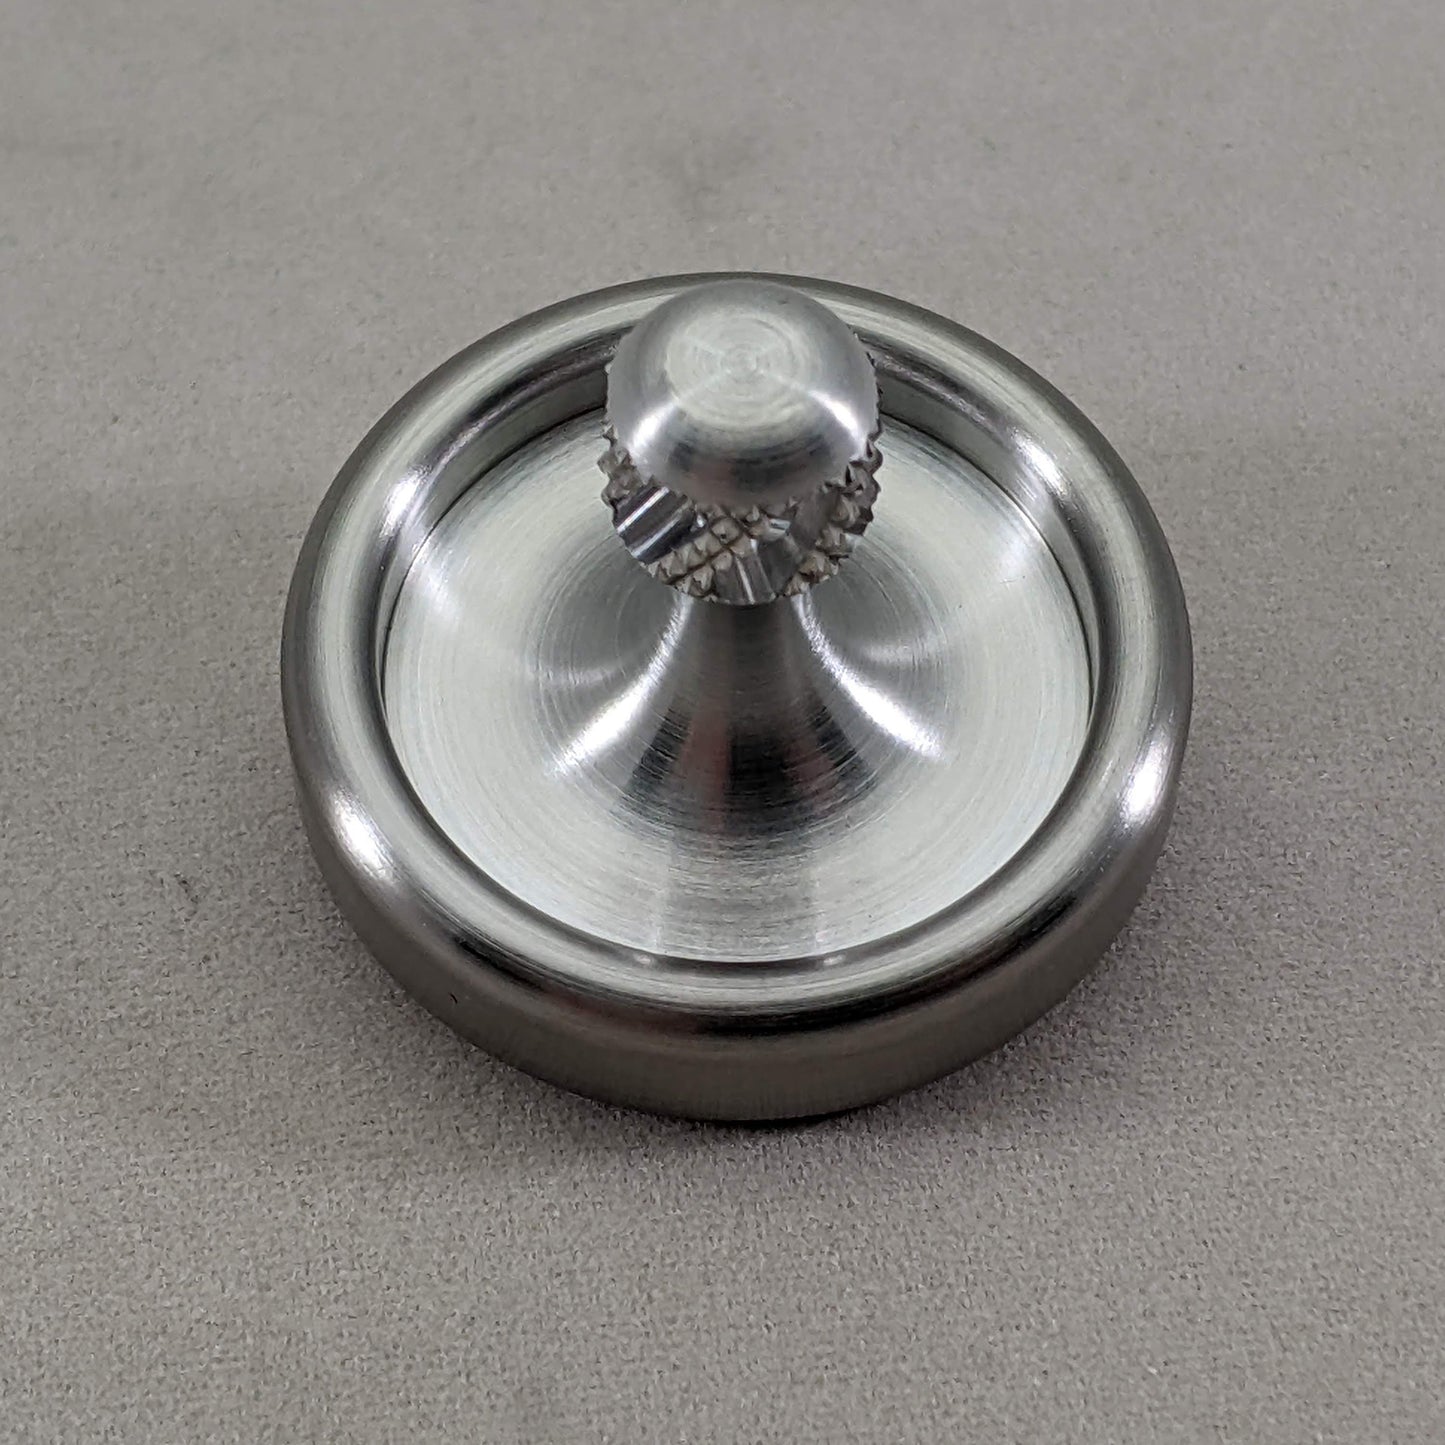 Dynamo - Tungsten and Aluminum Spin Top w/ Super Grip Spindle & Ruby Bearing